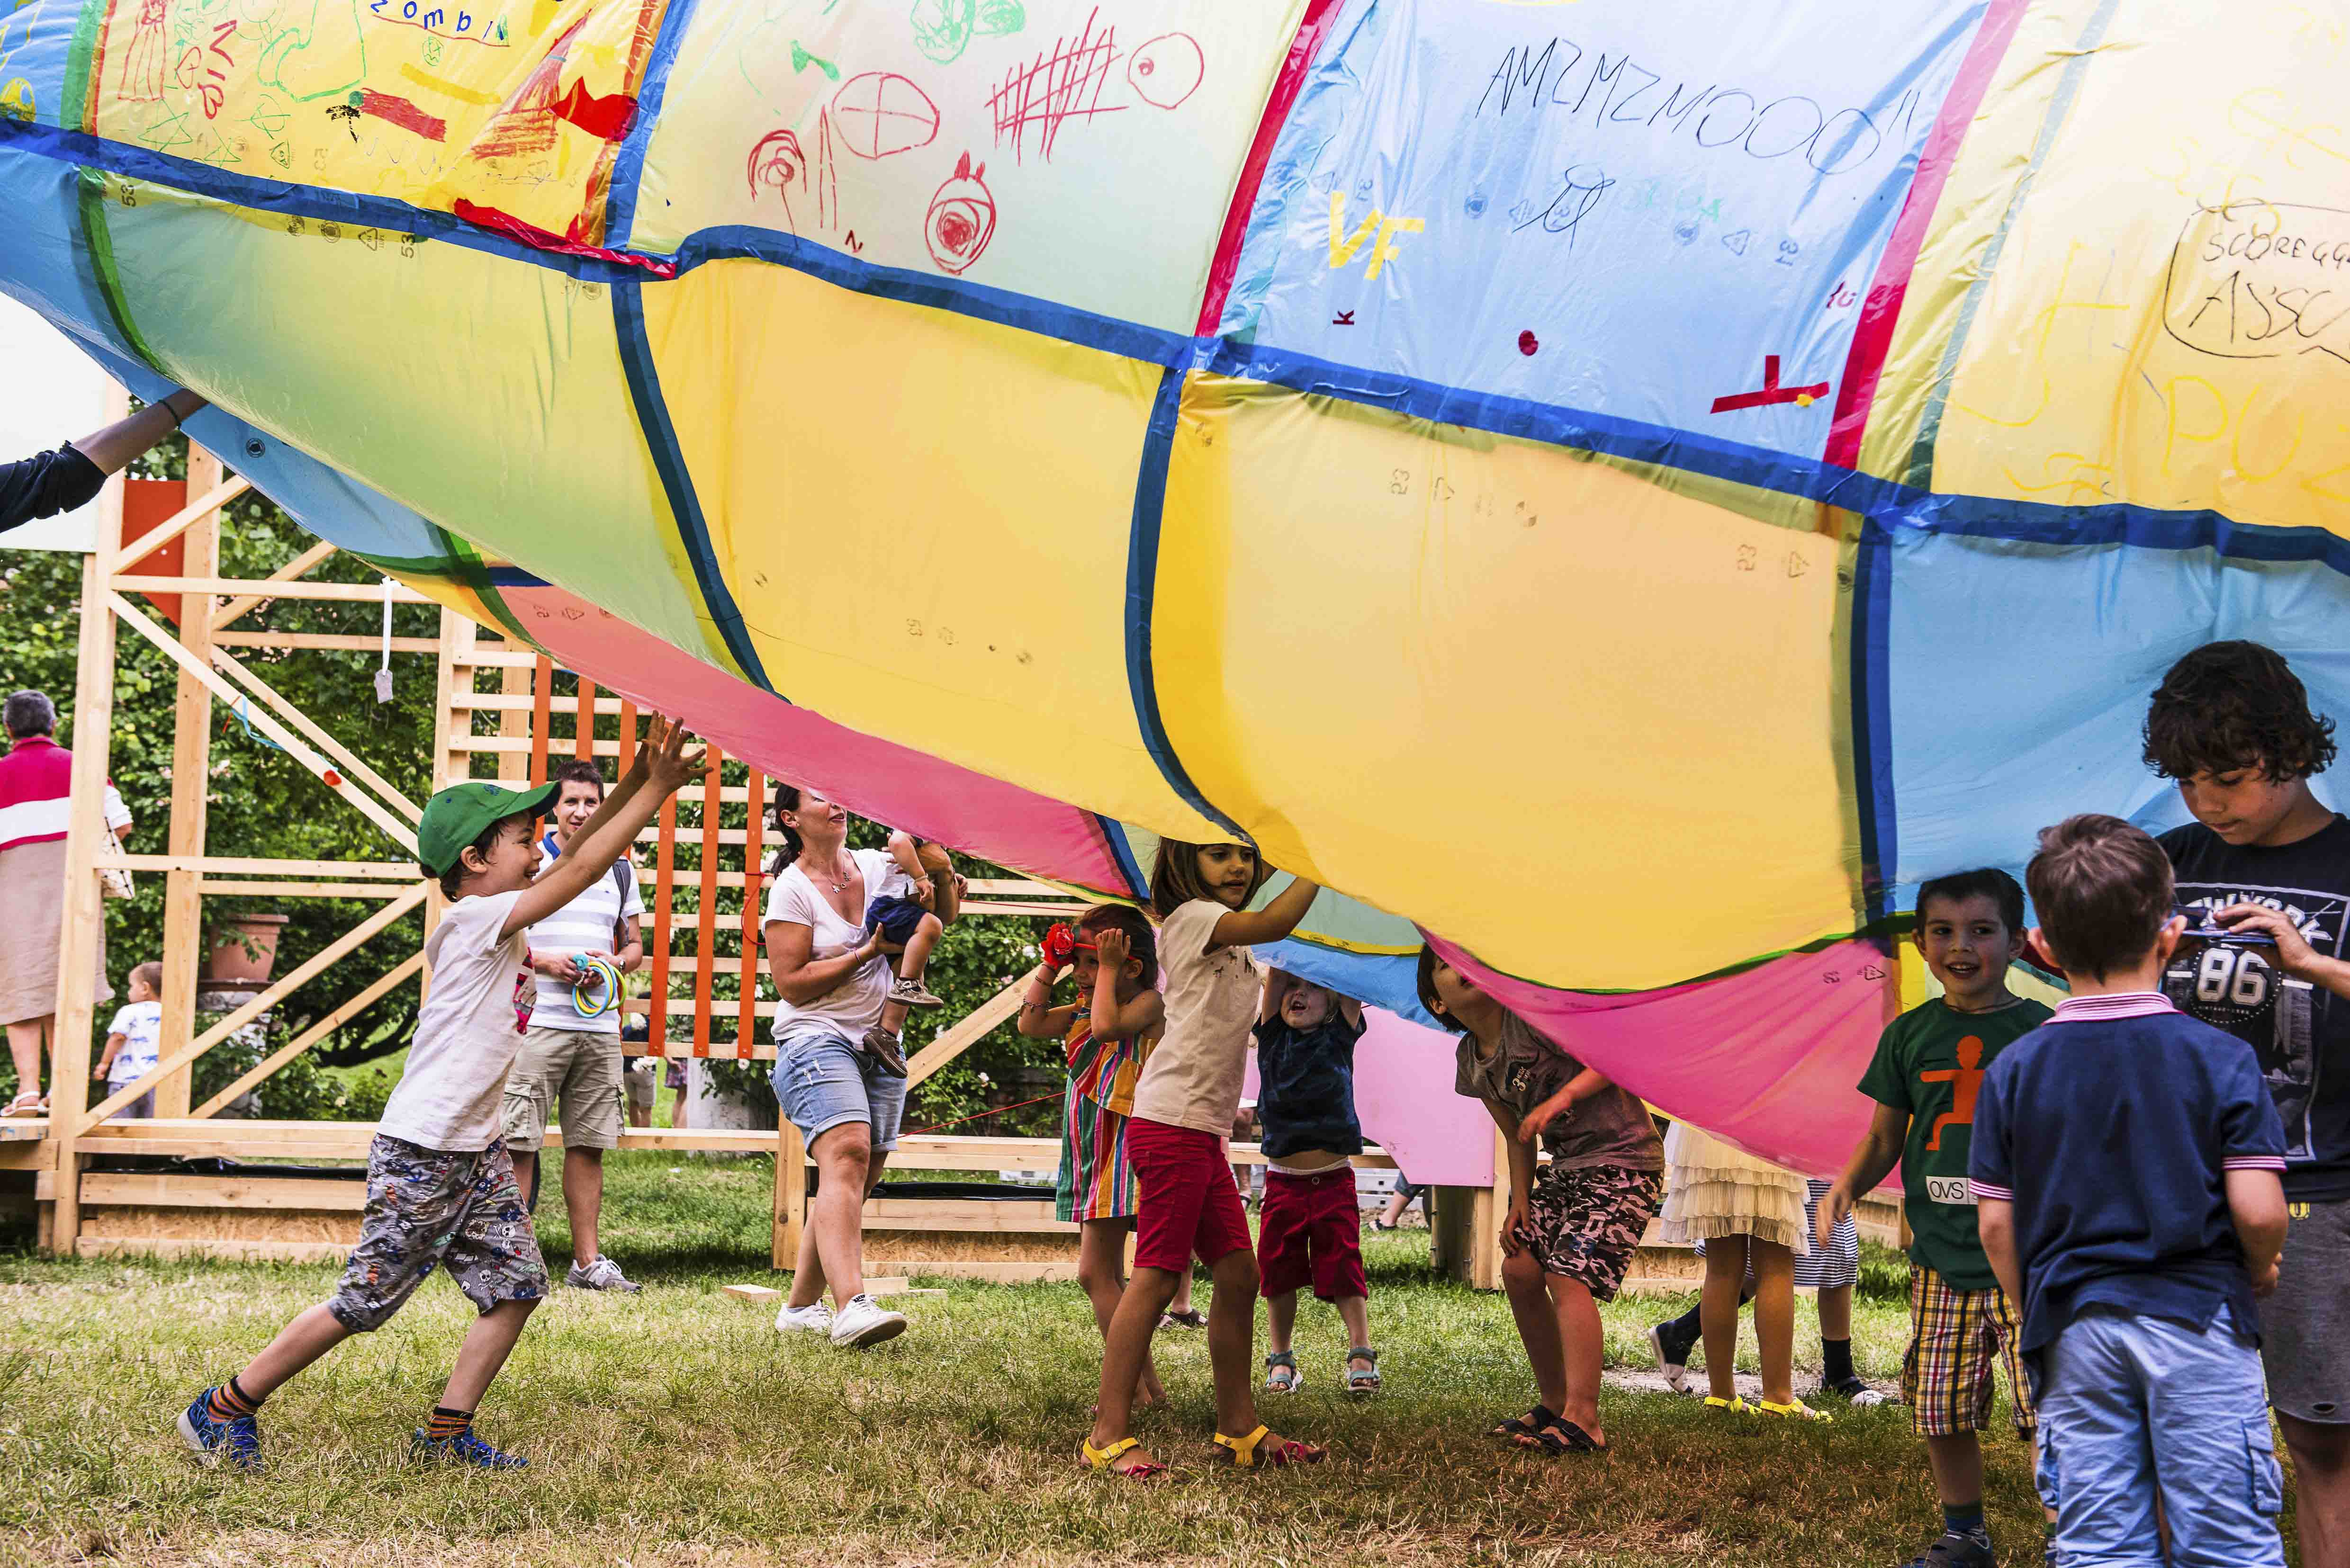 a group of young children play underneath a multi coloured inflatable object.